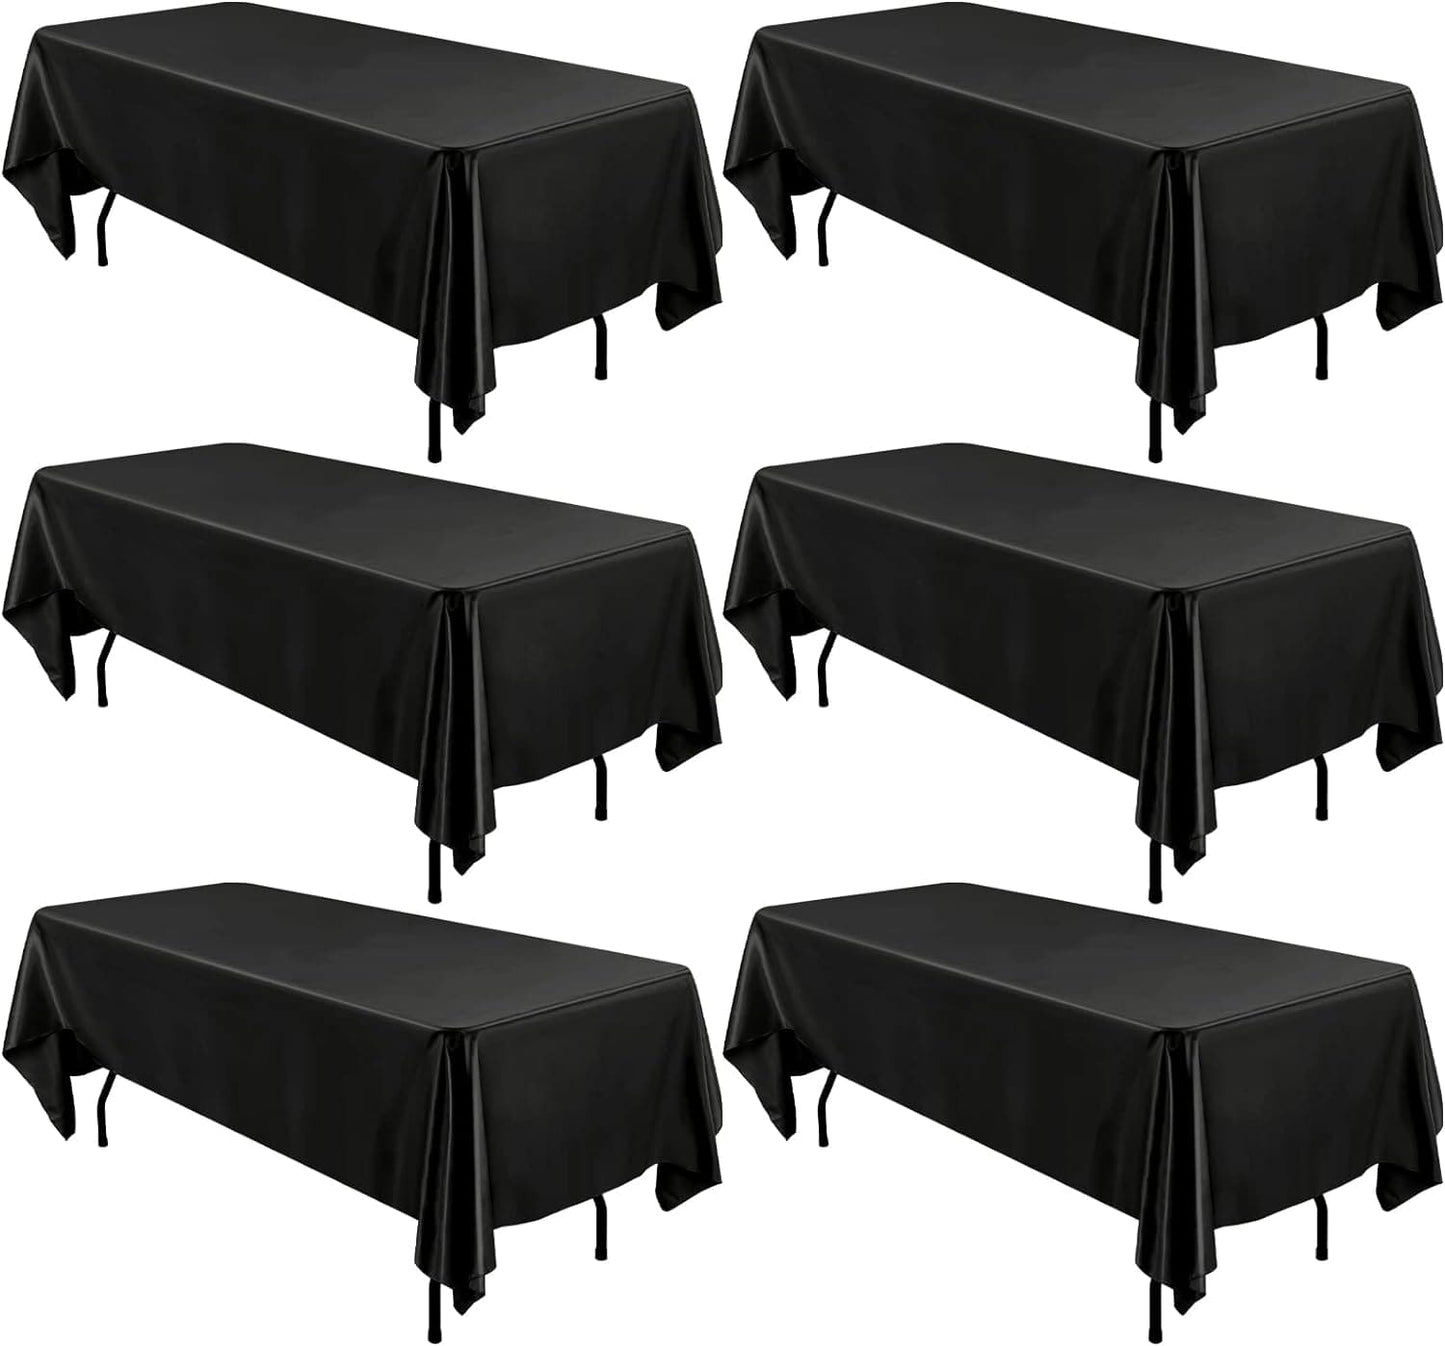 12 Pack Satin Tablecloth 57 x 108 Inch